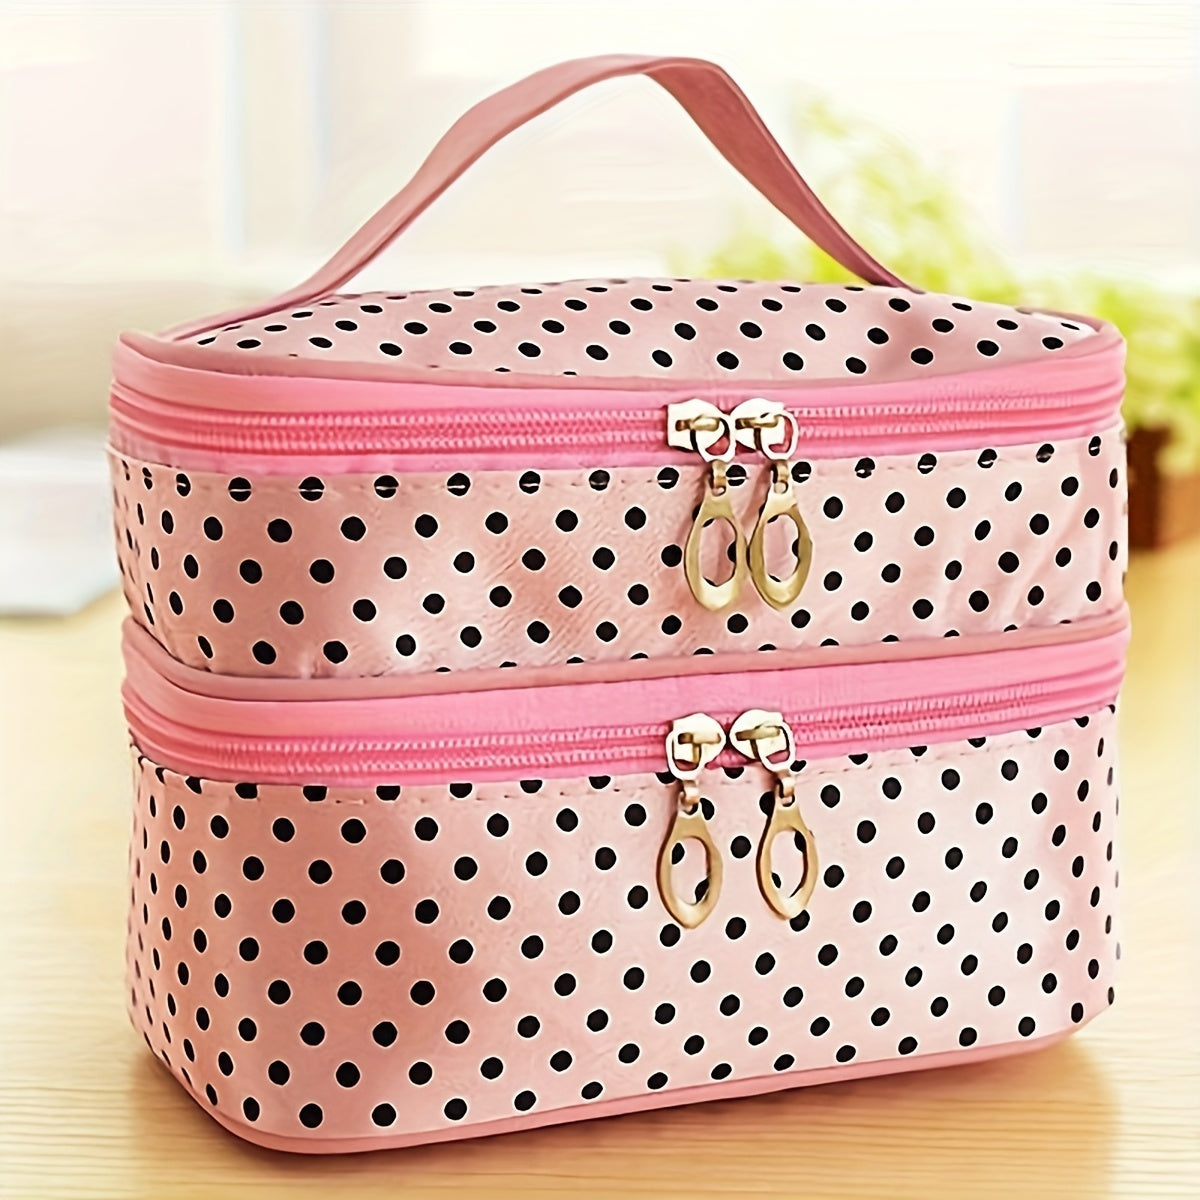 Cyflymder Double Layer Makeup Case Travel Toiletry Pouch Storage Bag For Women Girls With Handle And Brush Storage Area (Pink Polka Dot)